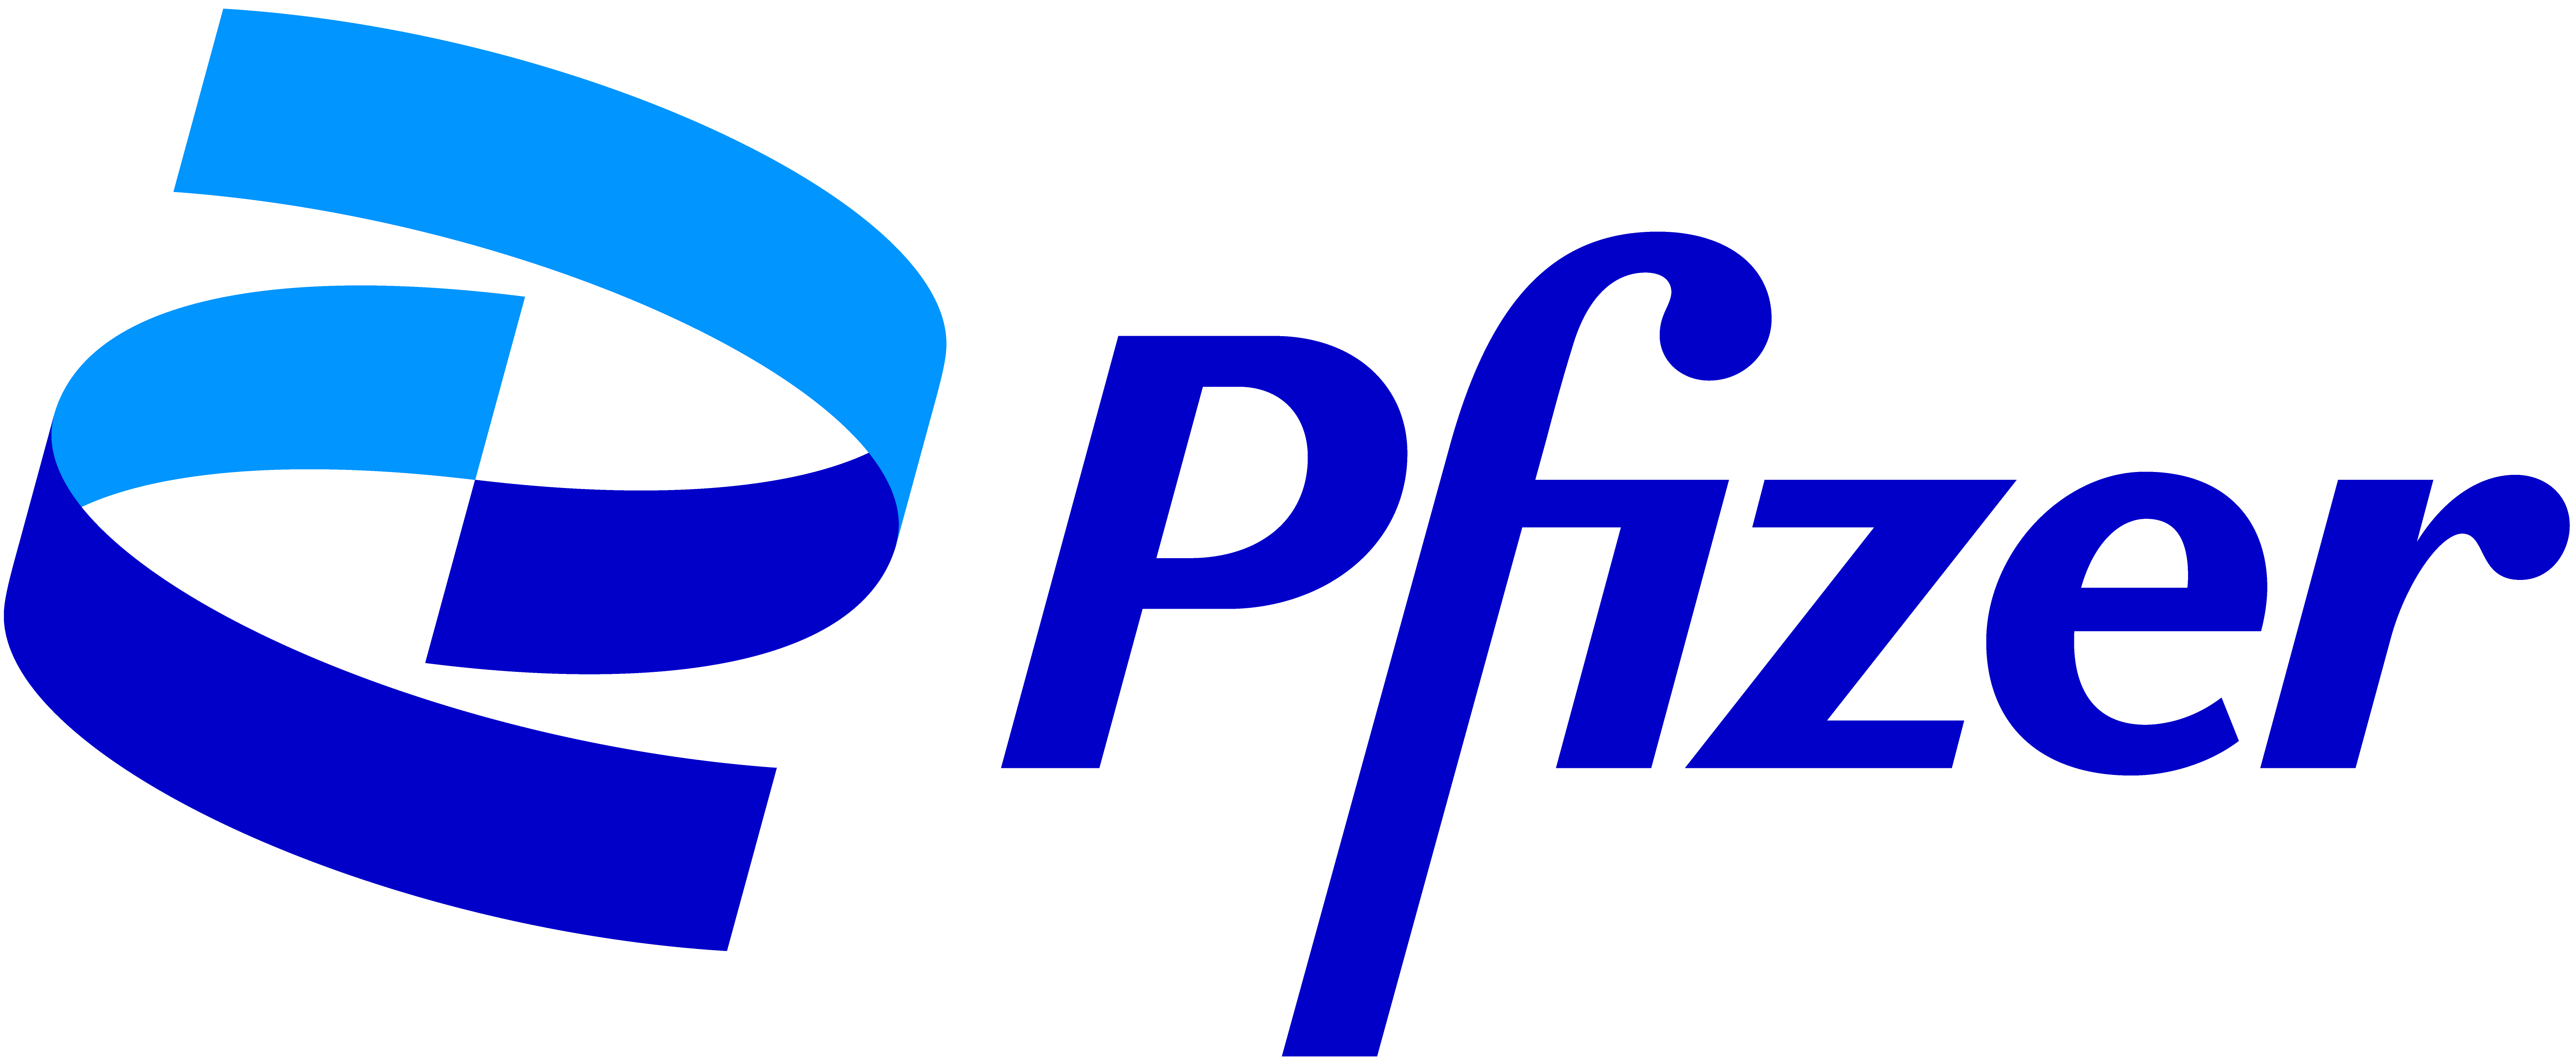 Pfizer logo. Working together for a healthier world.